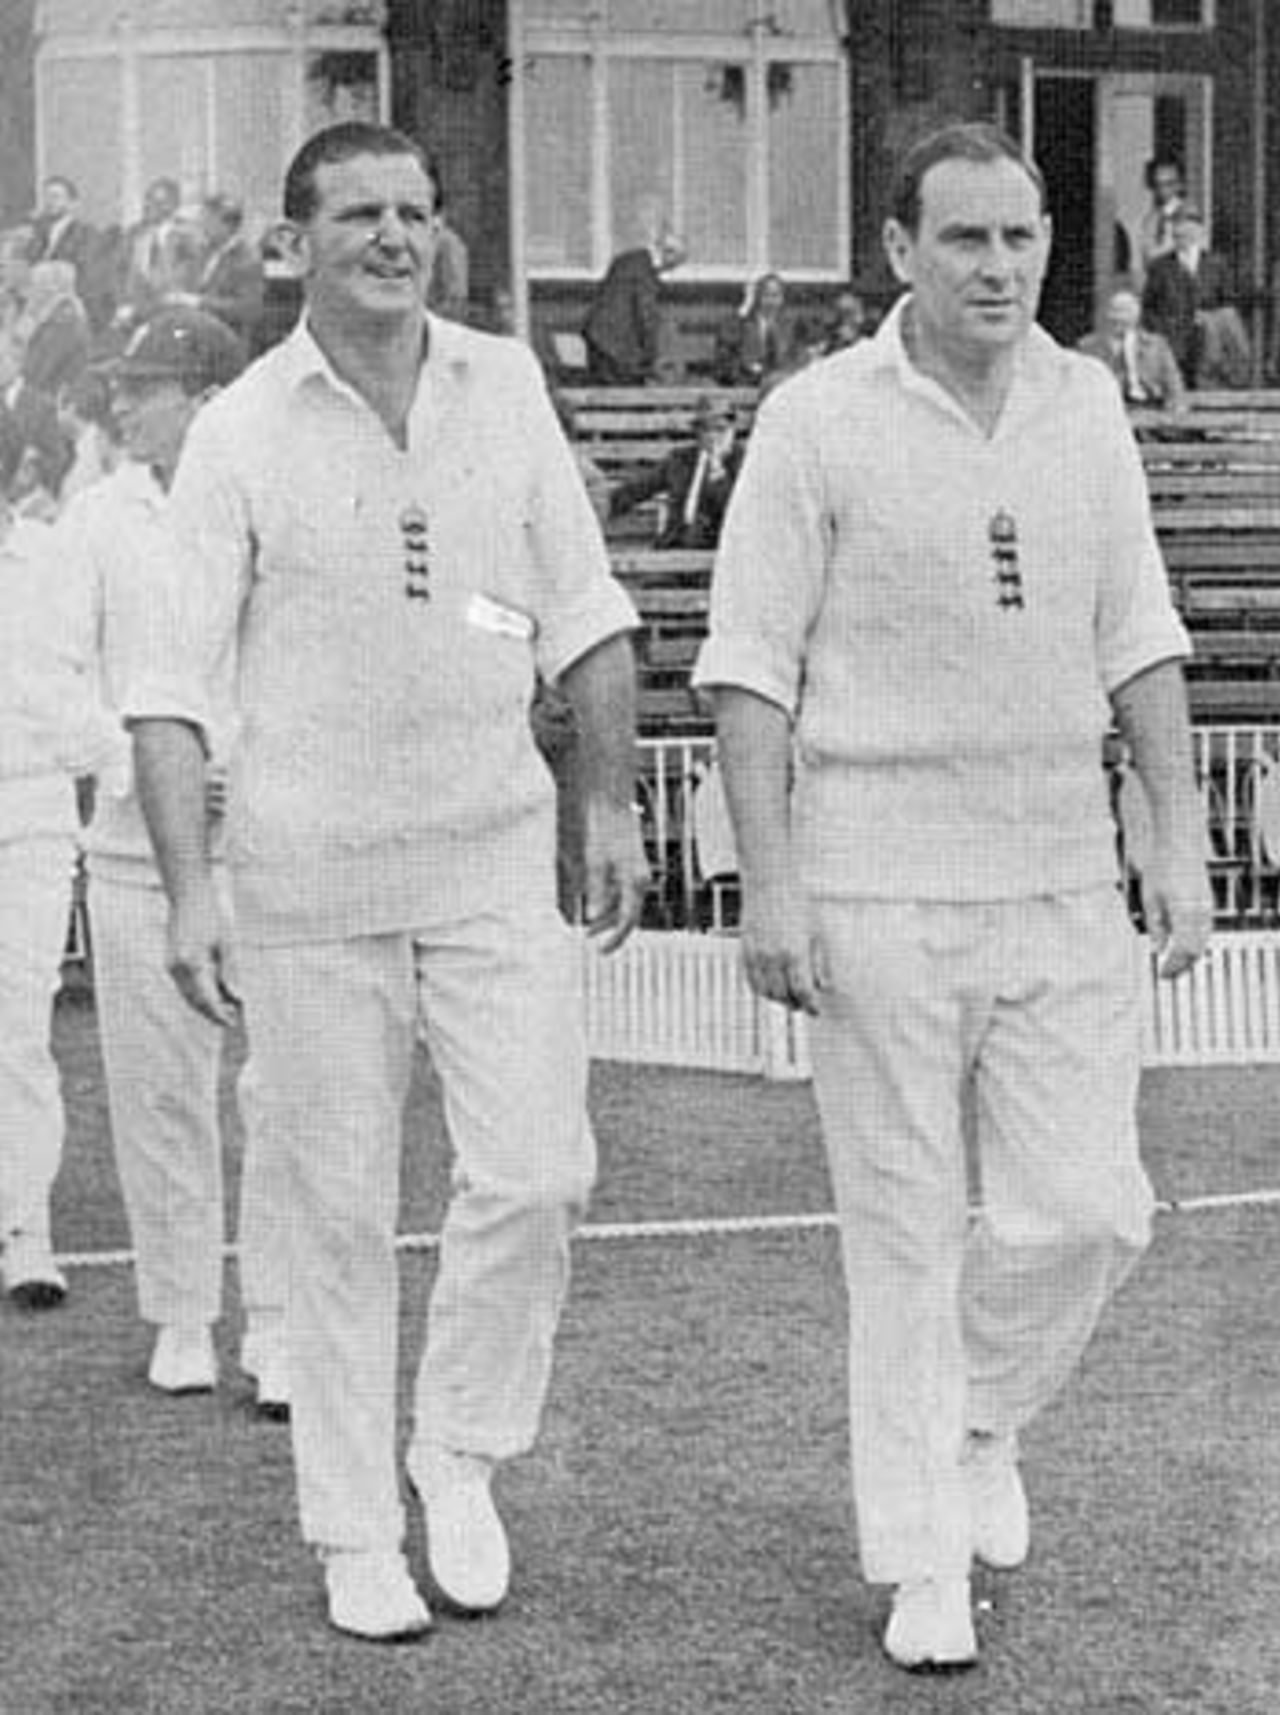 Ray Illingworth (right) leads Tom Graveney and the rest of the England team out, England v West Indies, Old Trafford, June 12, 1969